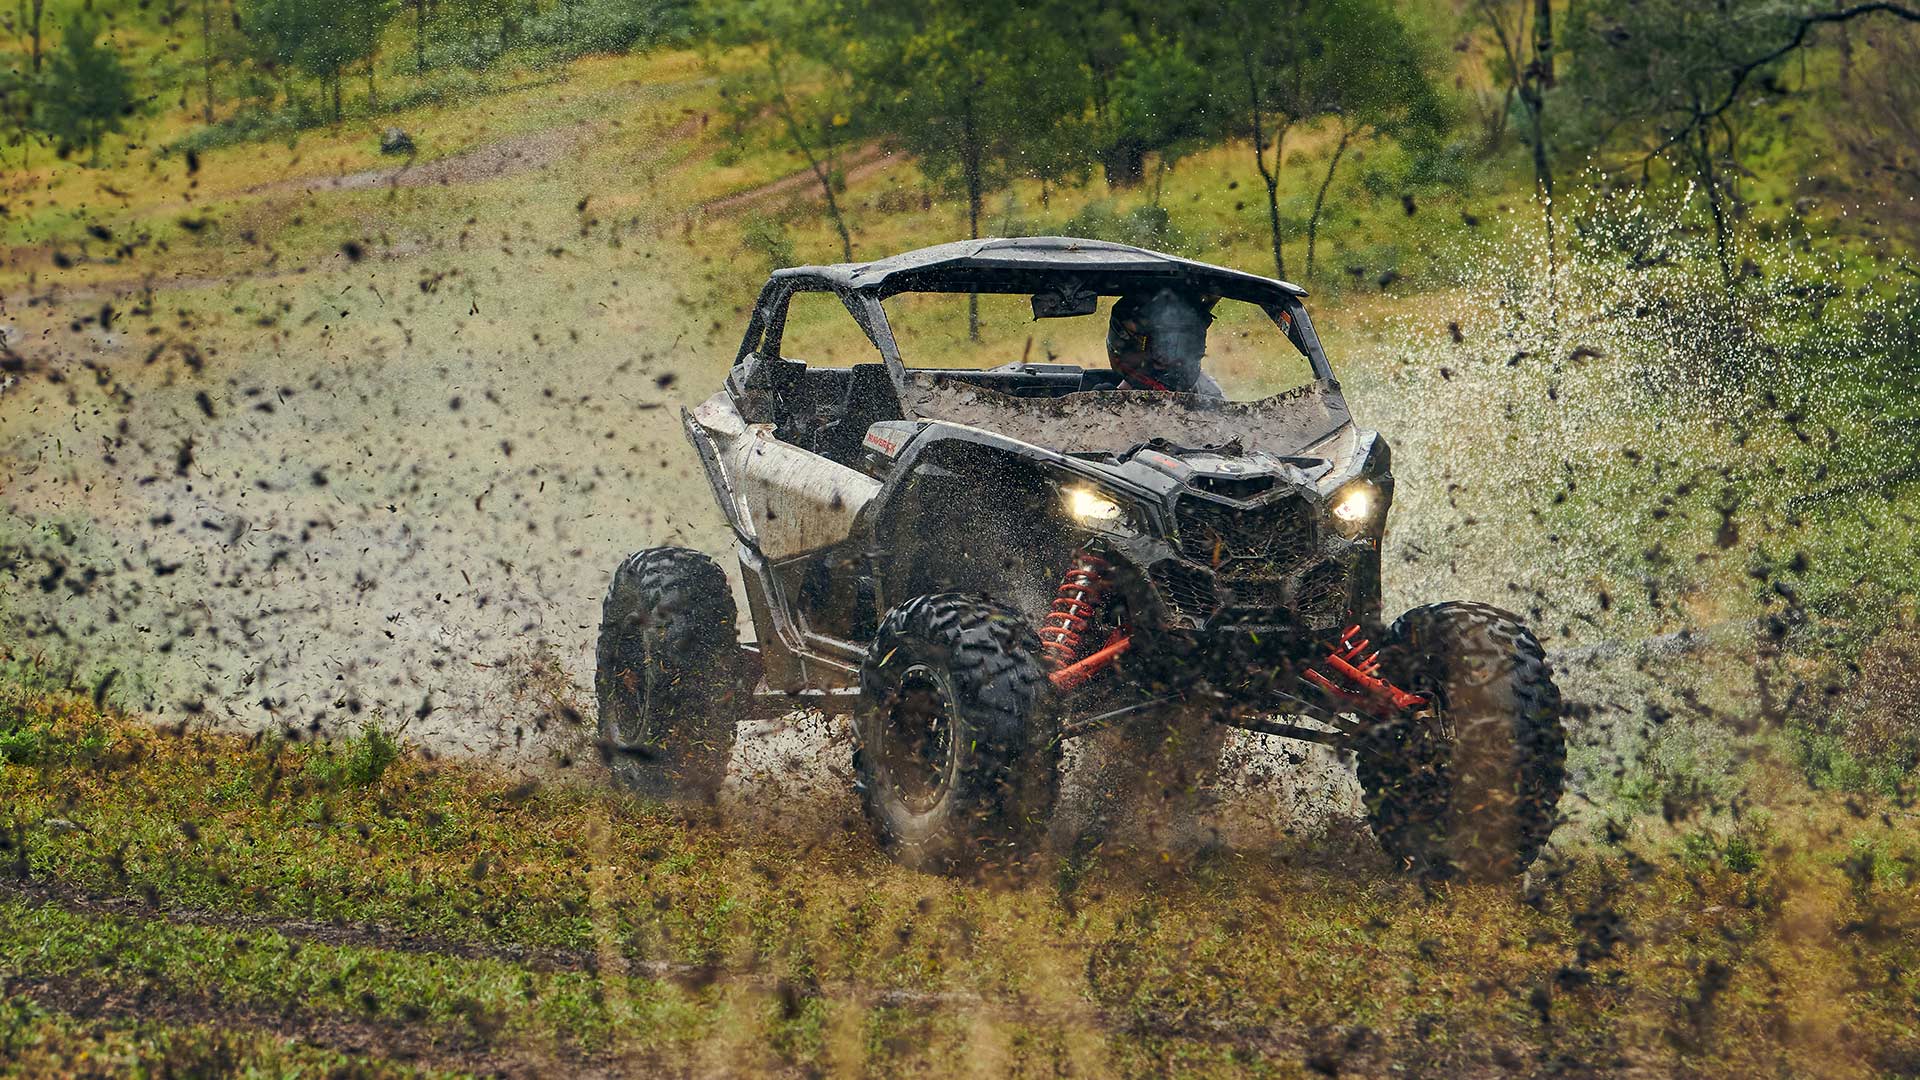 Can-Am Maverick X3 going fast in the mud